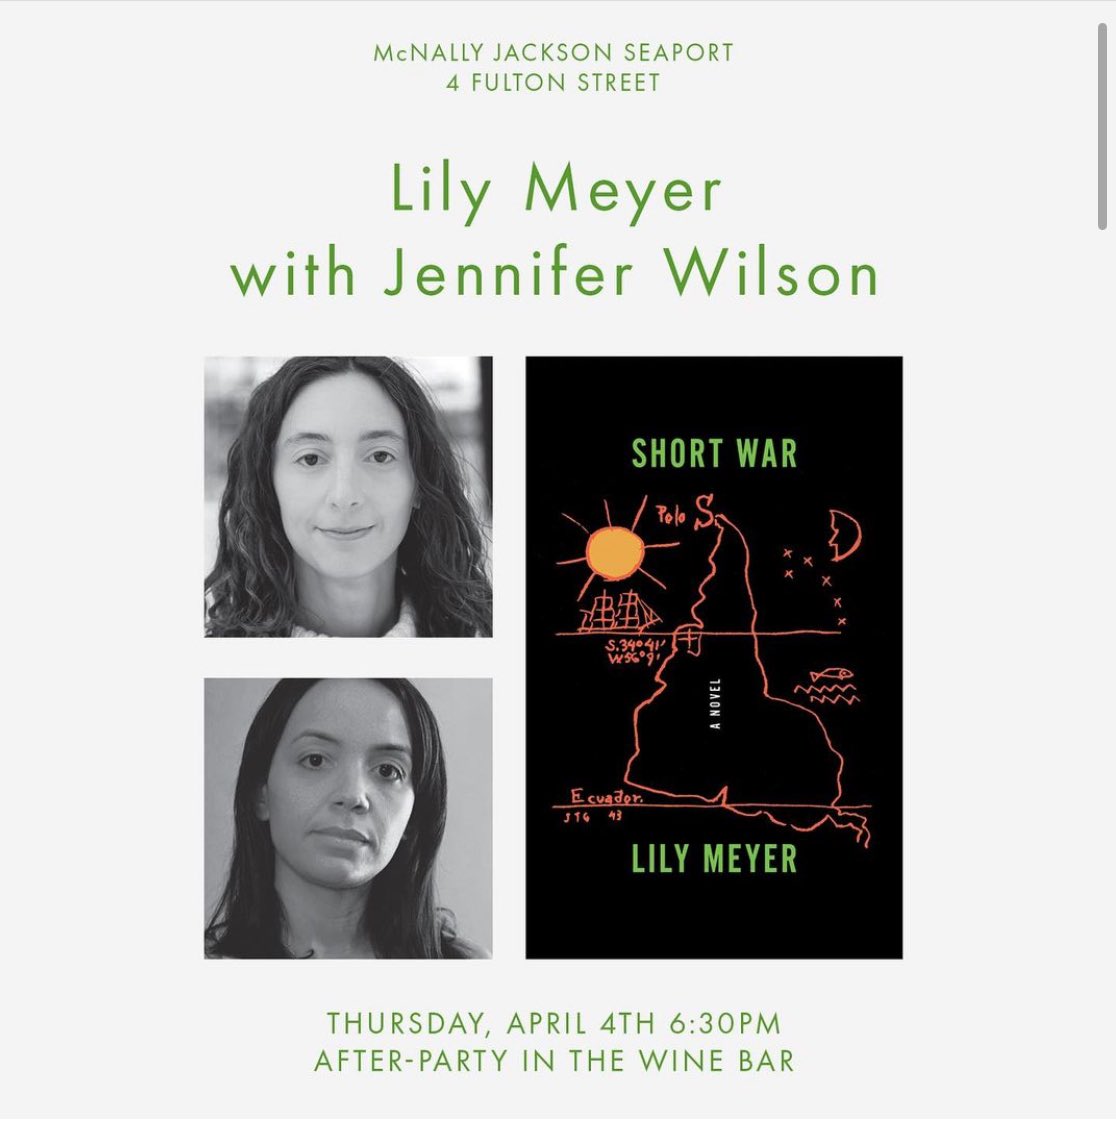 New York! Come meet Short War (I mean and also me) tonight @mcnallyjackson with @JenLouiseWilson!